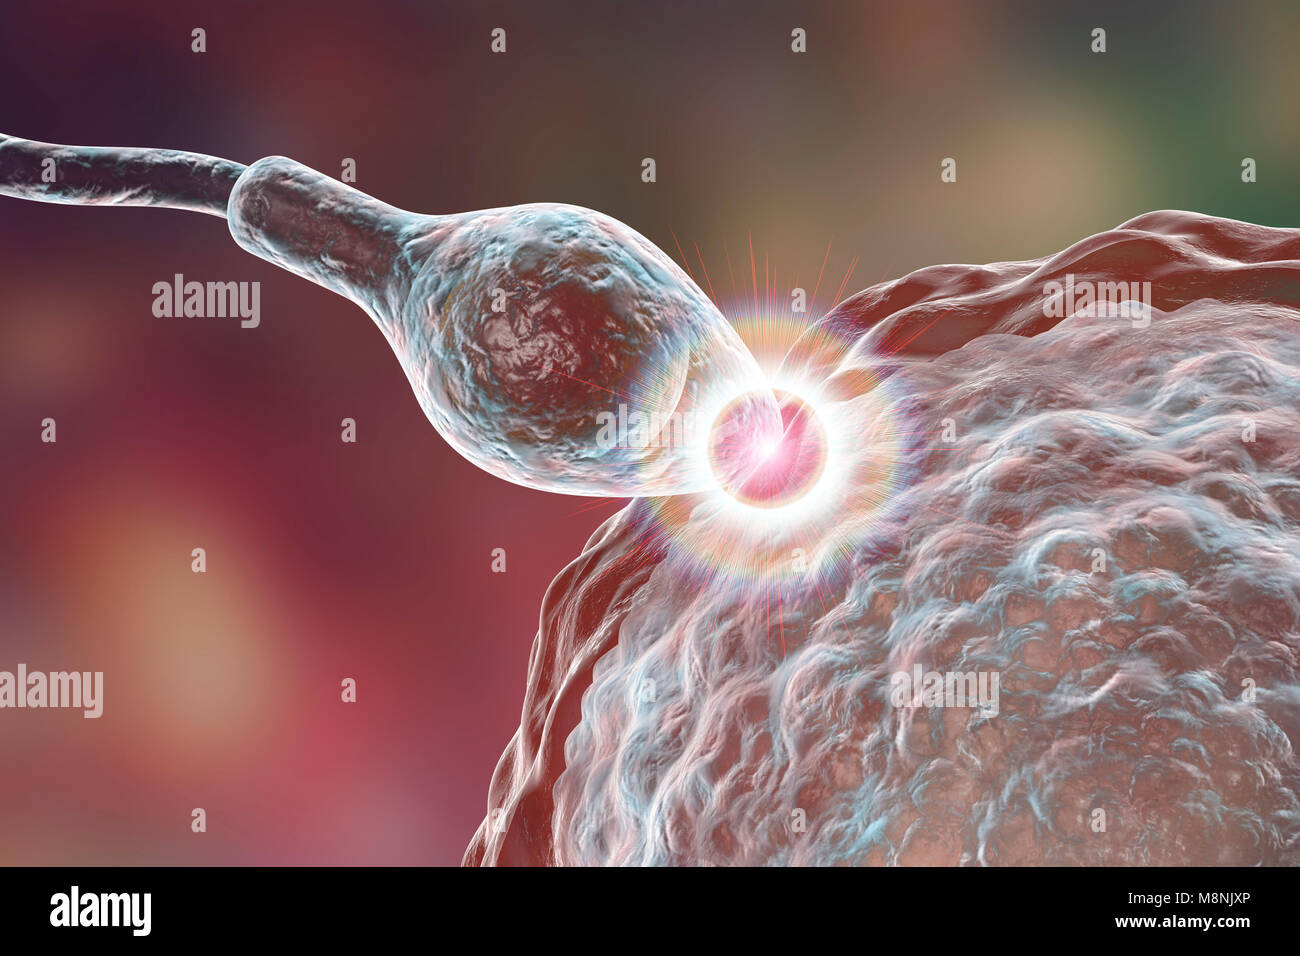 Sperm fertilizing egg, computer illustration. The sperm has an oval head and a hair-like tail which it beats with a whiplash motion to swim. The human female usually produces a single large egg from the ovary, while the male releases some 300 million much smaller sperm. The sperm travel through the uterus (womb) and up the fallopian tubes to reach the egg. The sperm must penetrate a thick layer around the egg; this penetration is aided by enzymes contained in the sperm's head. Only one sperm can fuse with the egg nucleus. Fertilisation enables male and female genetic material to be shared. Stock Photo